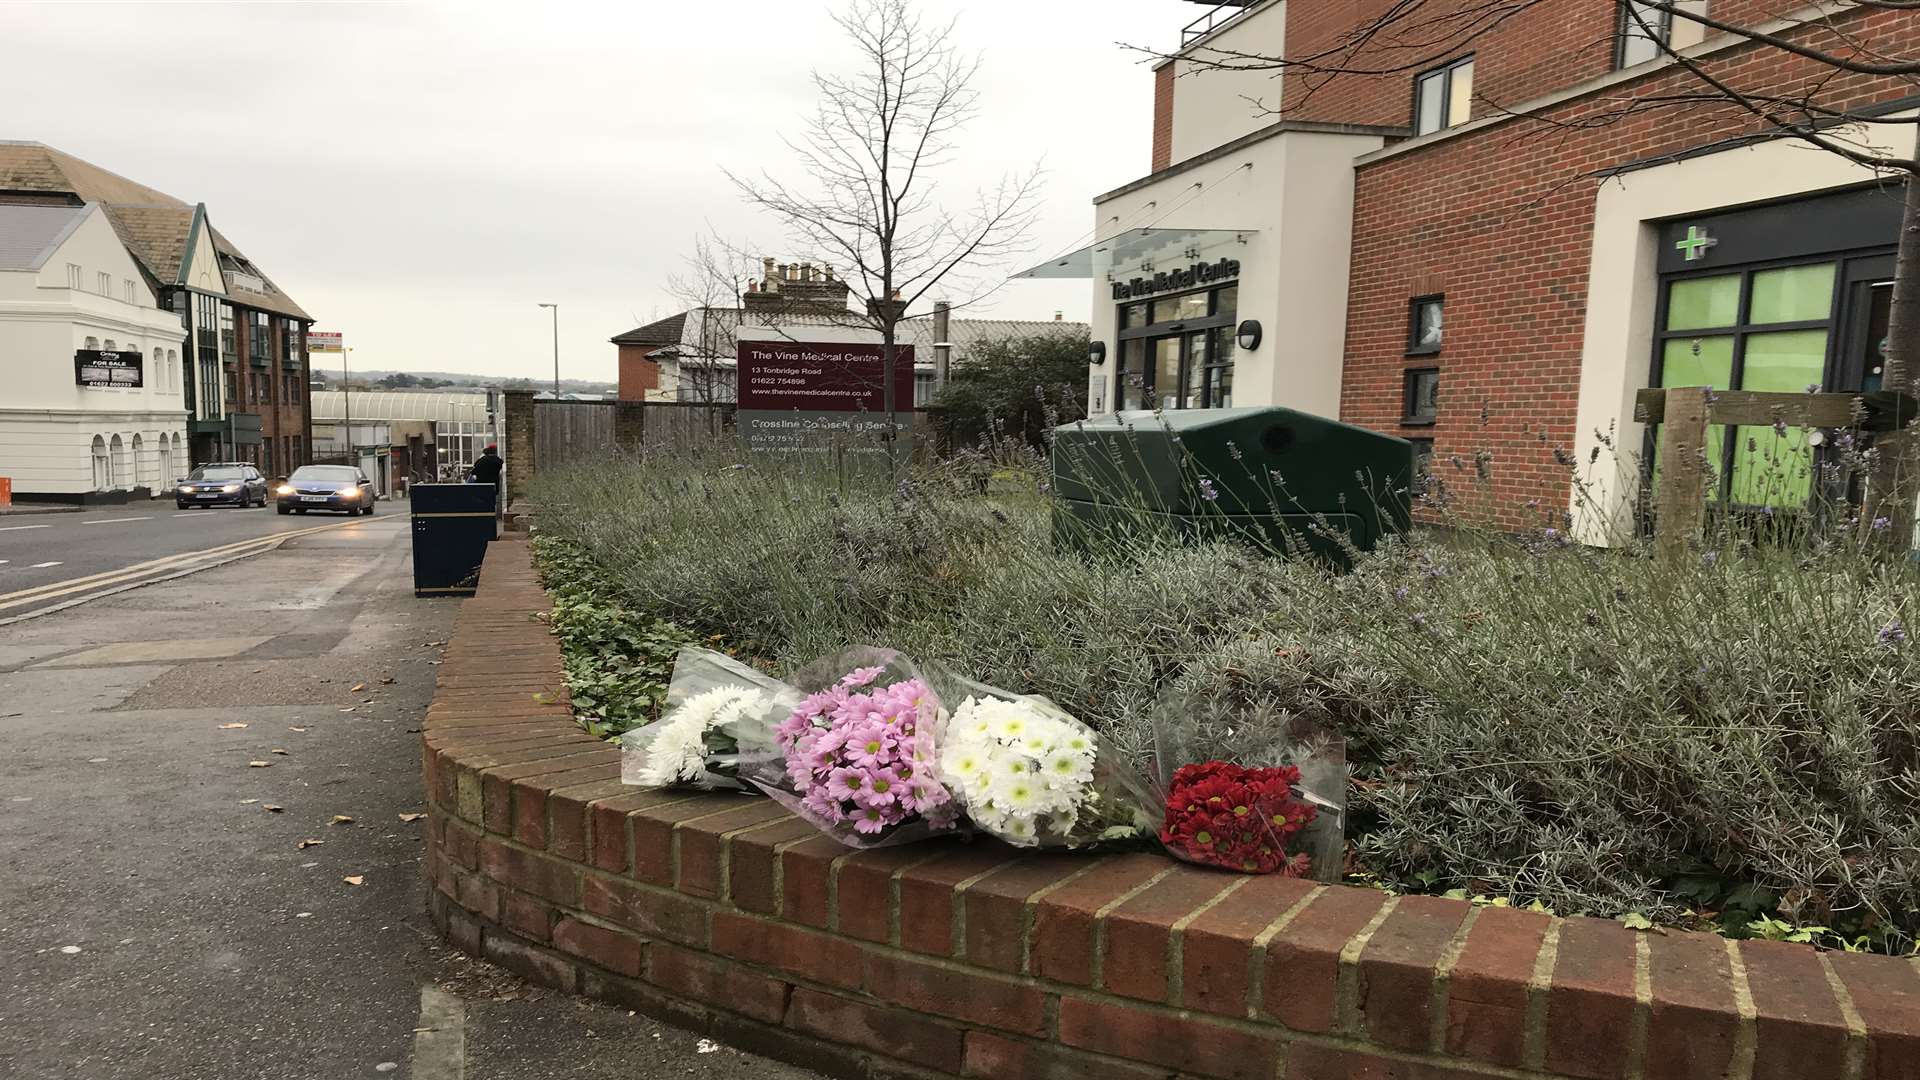 Tributes were left at the scene of the crash outside The Vine Medical Centre in Tonbridge Road